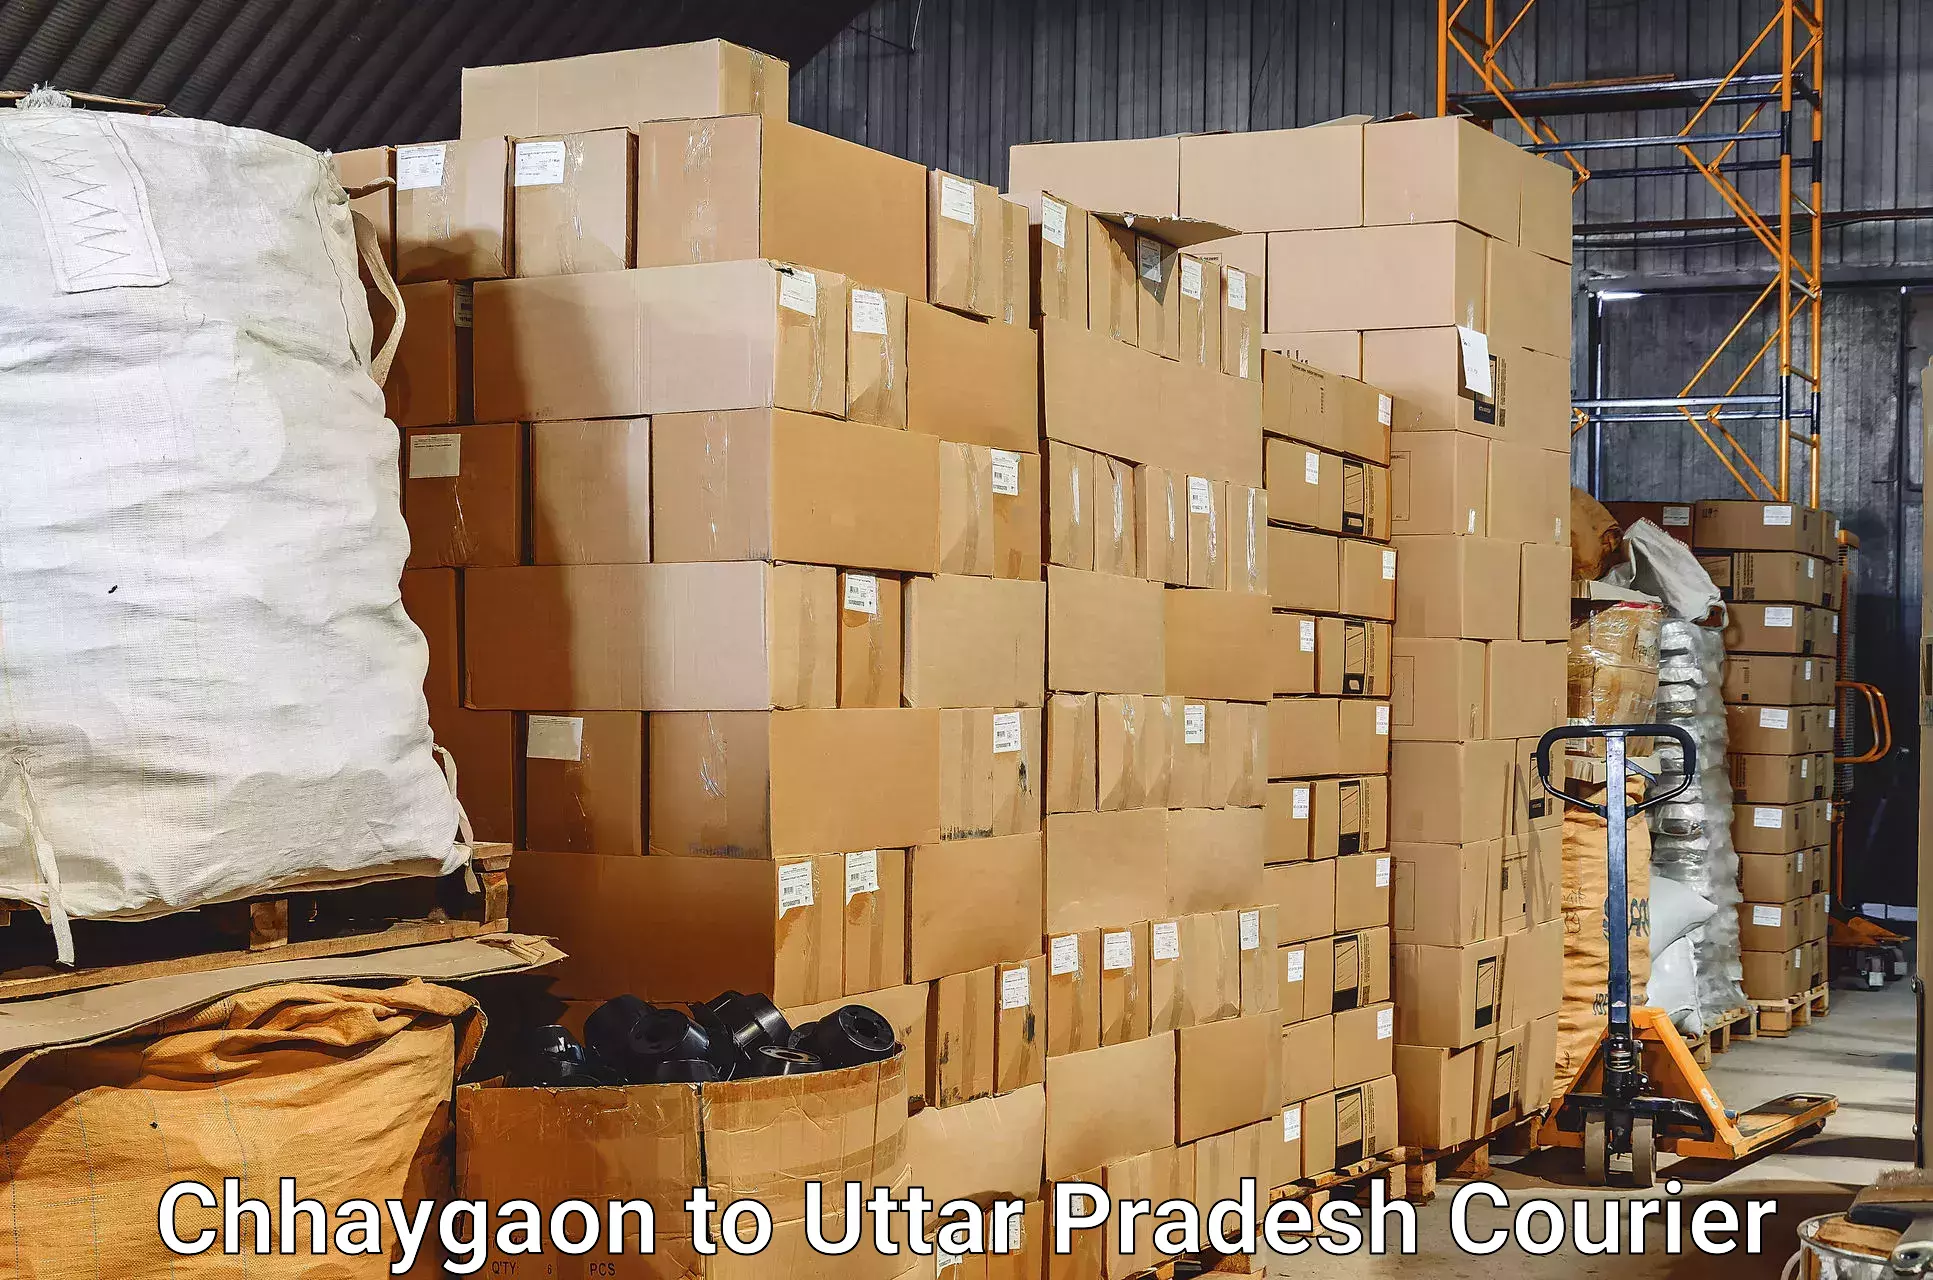 Baggage relocation service Chhaygaon to Anupshahar